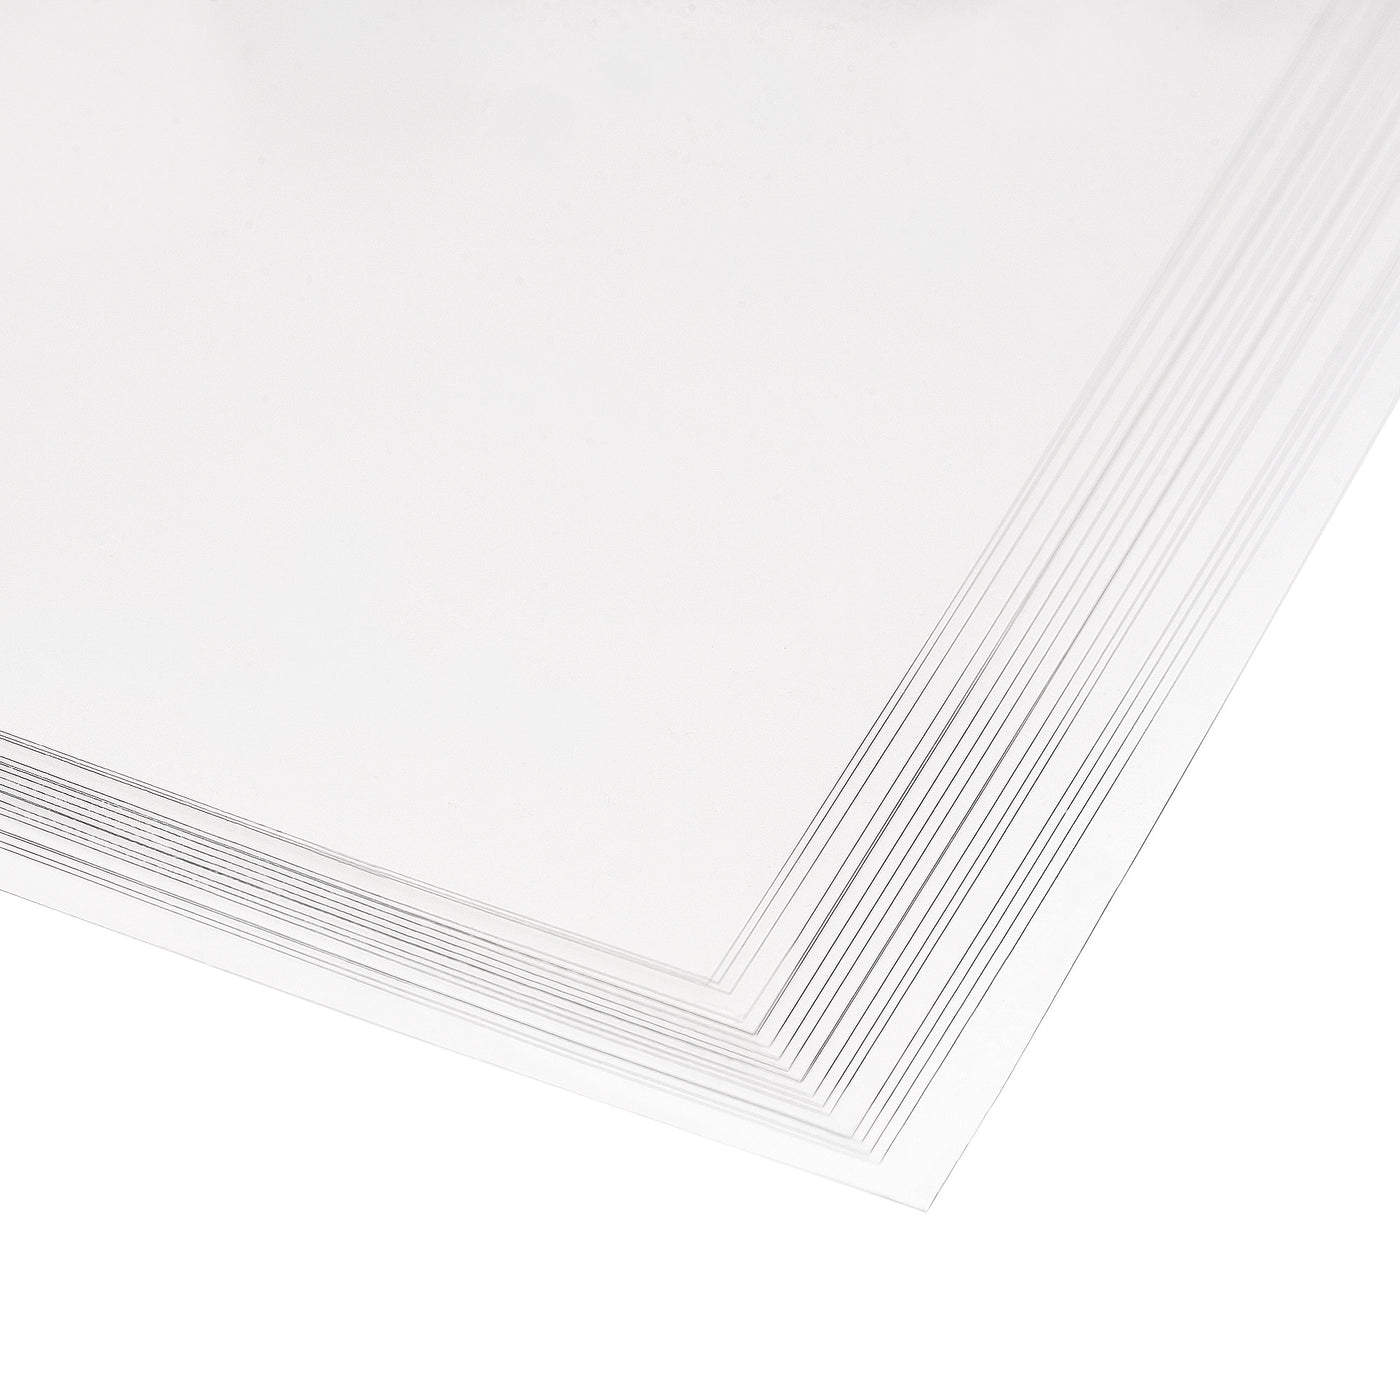 uxcell Uxcell 0.1mm Thick A4 Size Clear PVC Sheet 297mm x 210mm Flexible Cover Protector,Office,DIY Cutting,20pcs